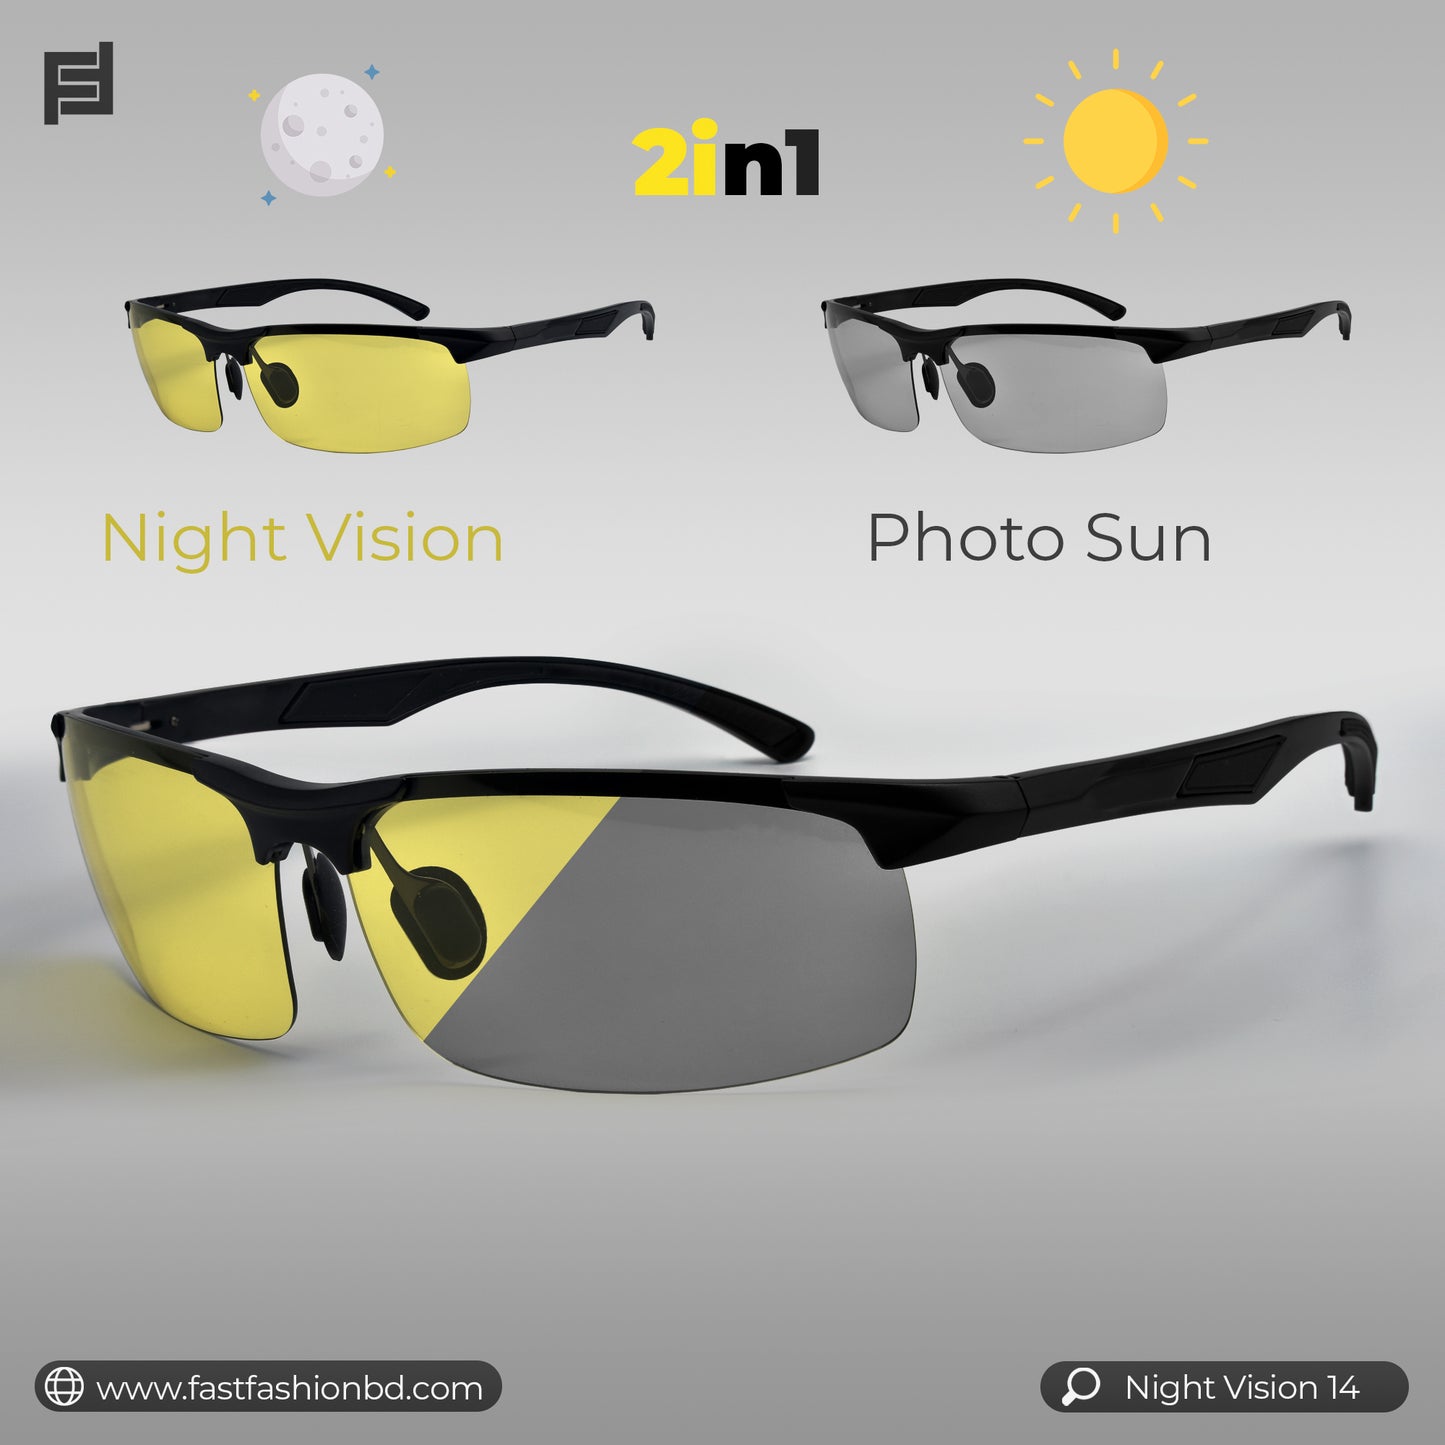 2in1 Sunglass Night Vision and Photo Sun - Night Vision 14